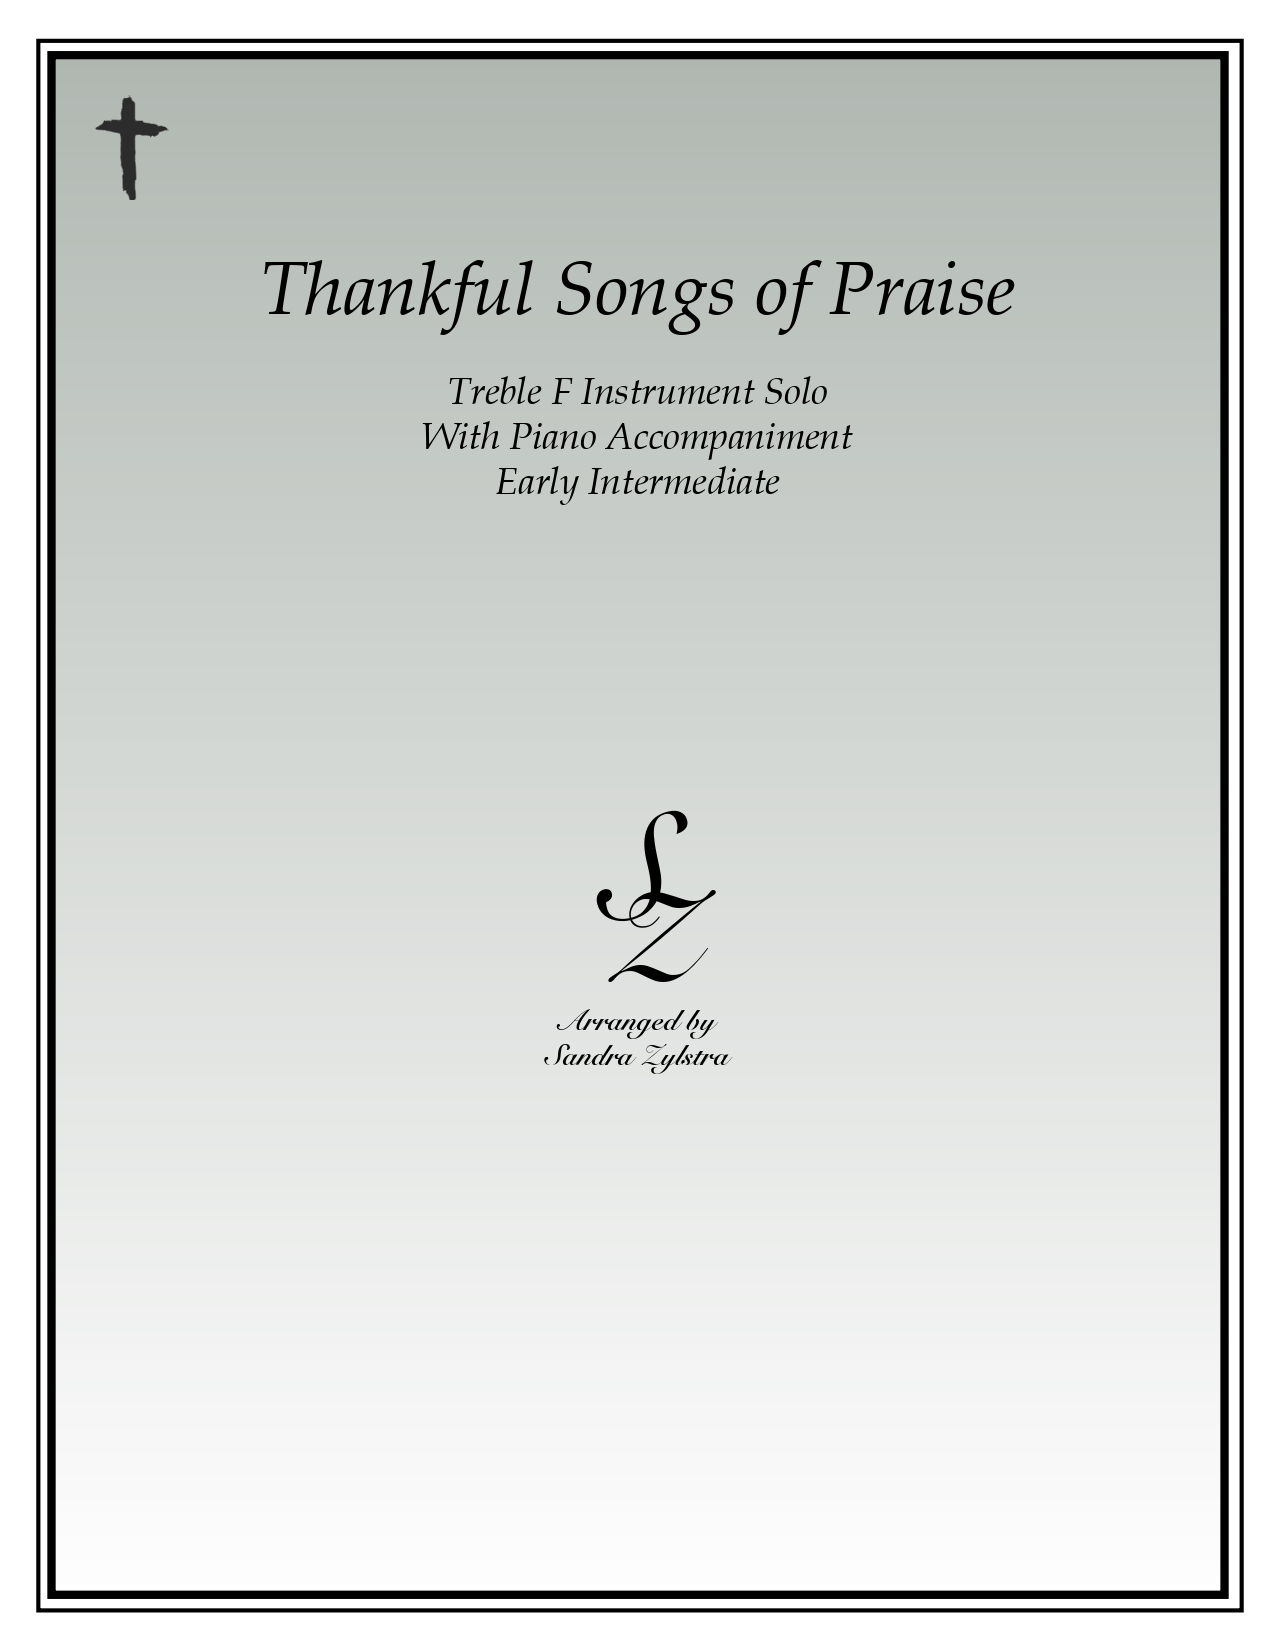 Thankful Songs Of Praise F instrument solo part cover page 00011